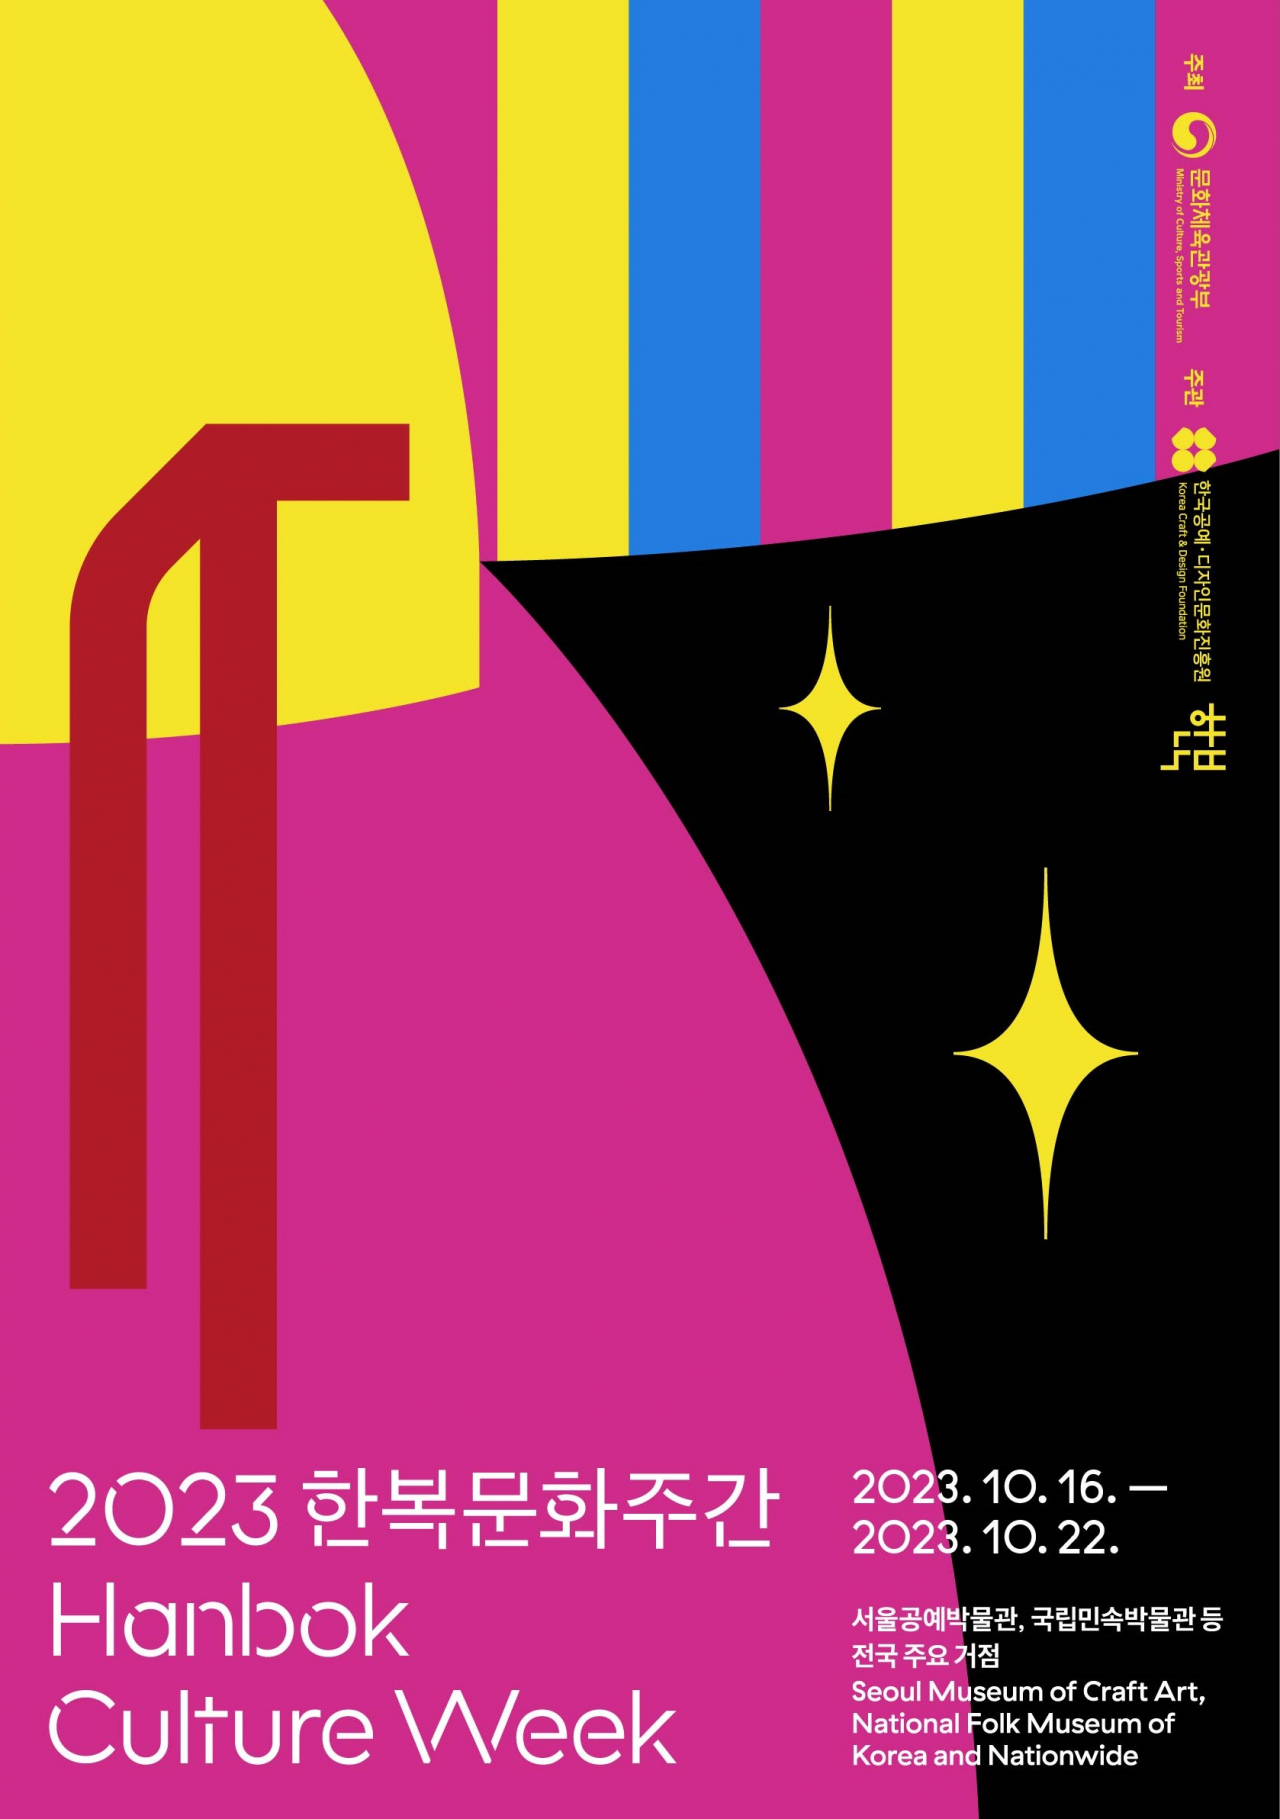 2023 Hanbok Culture Week is set to take place Monday through Saturday, organized by the Korea Craft & Design Foundation. (KCDF)